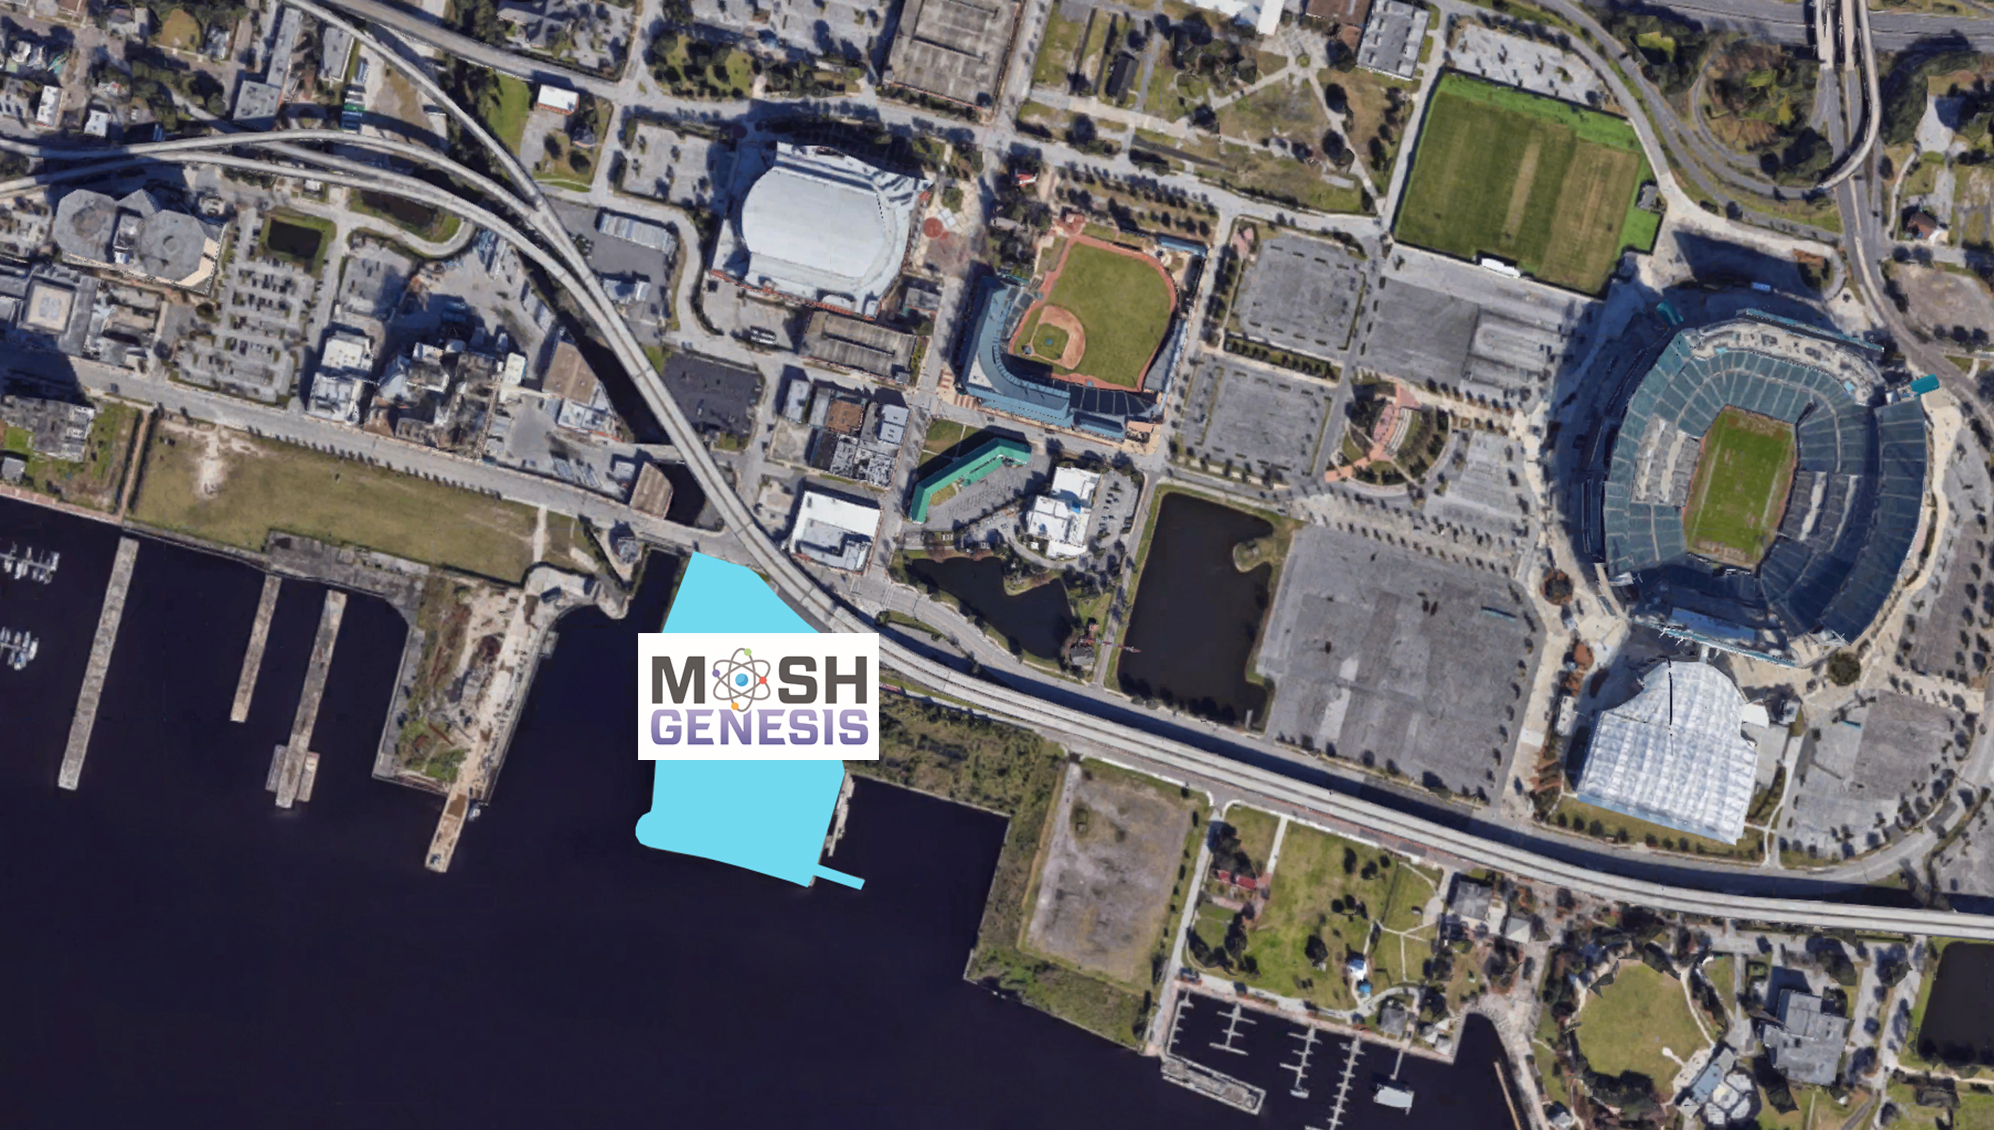 The museum site is south of VyStar Veterans Memorial Arena.